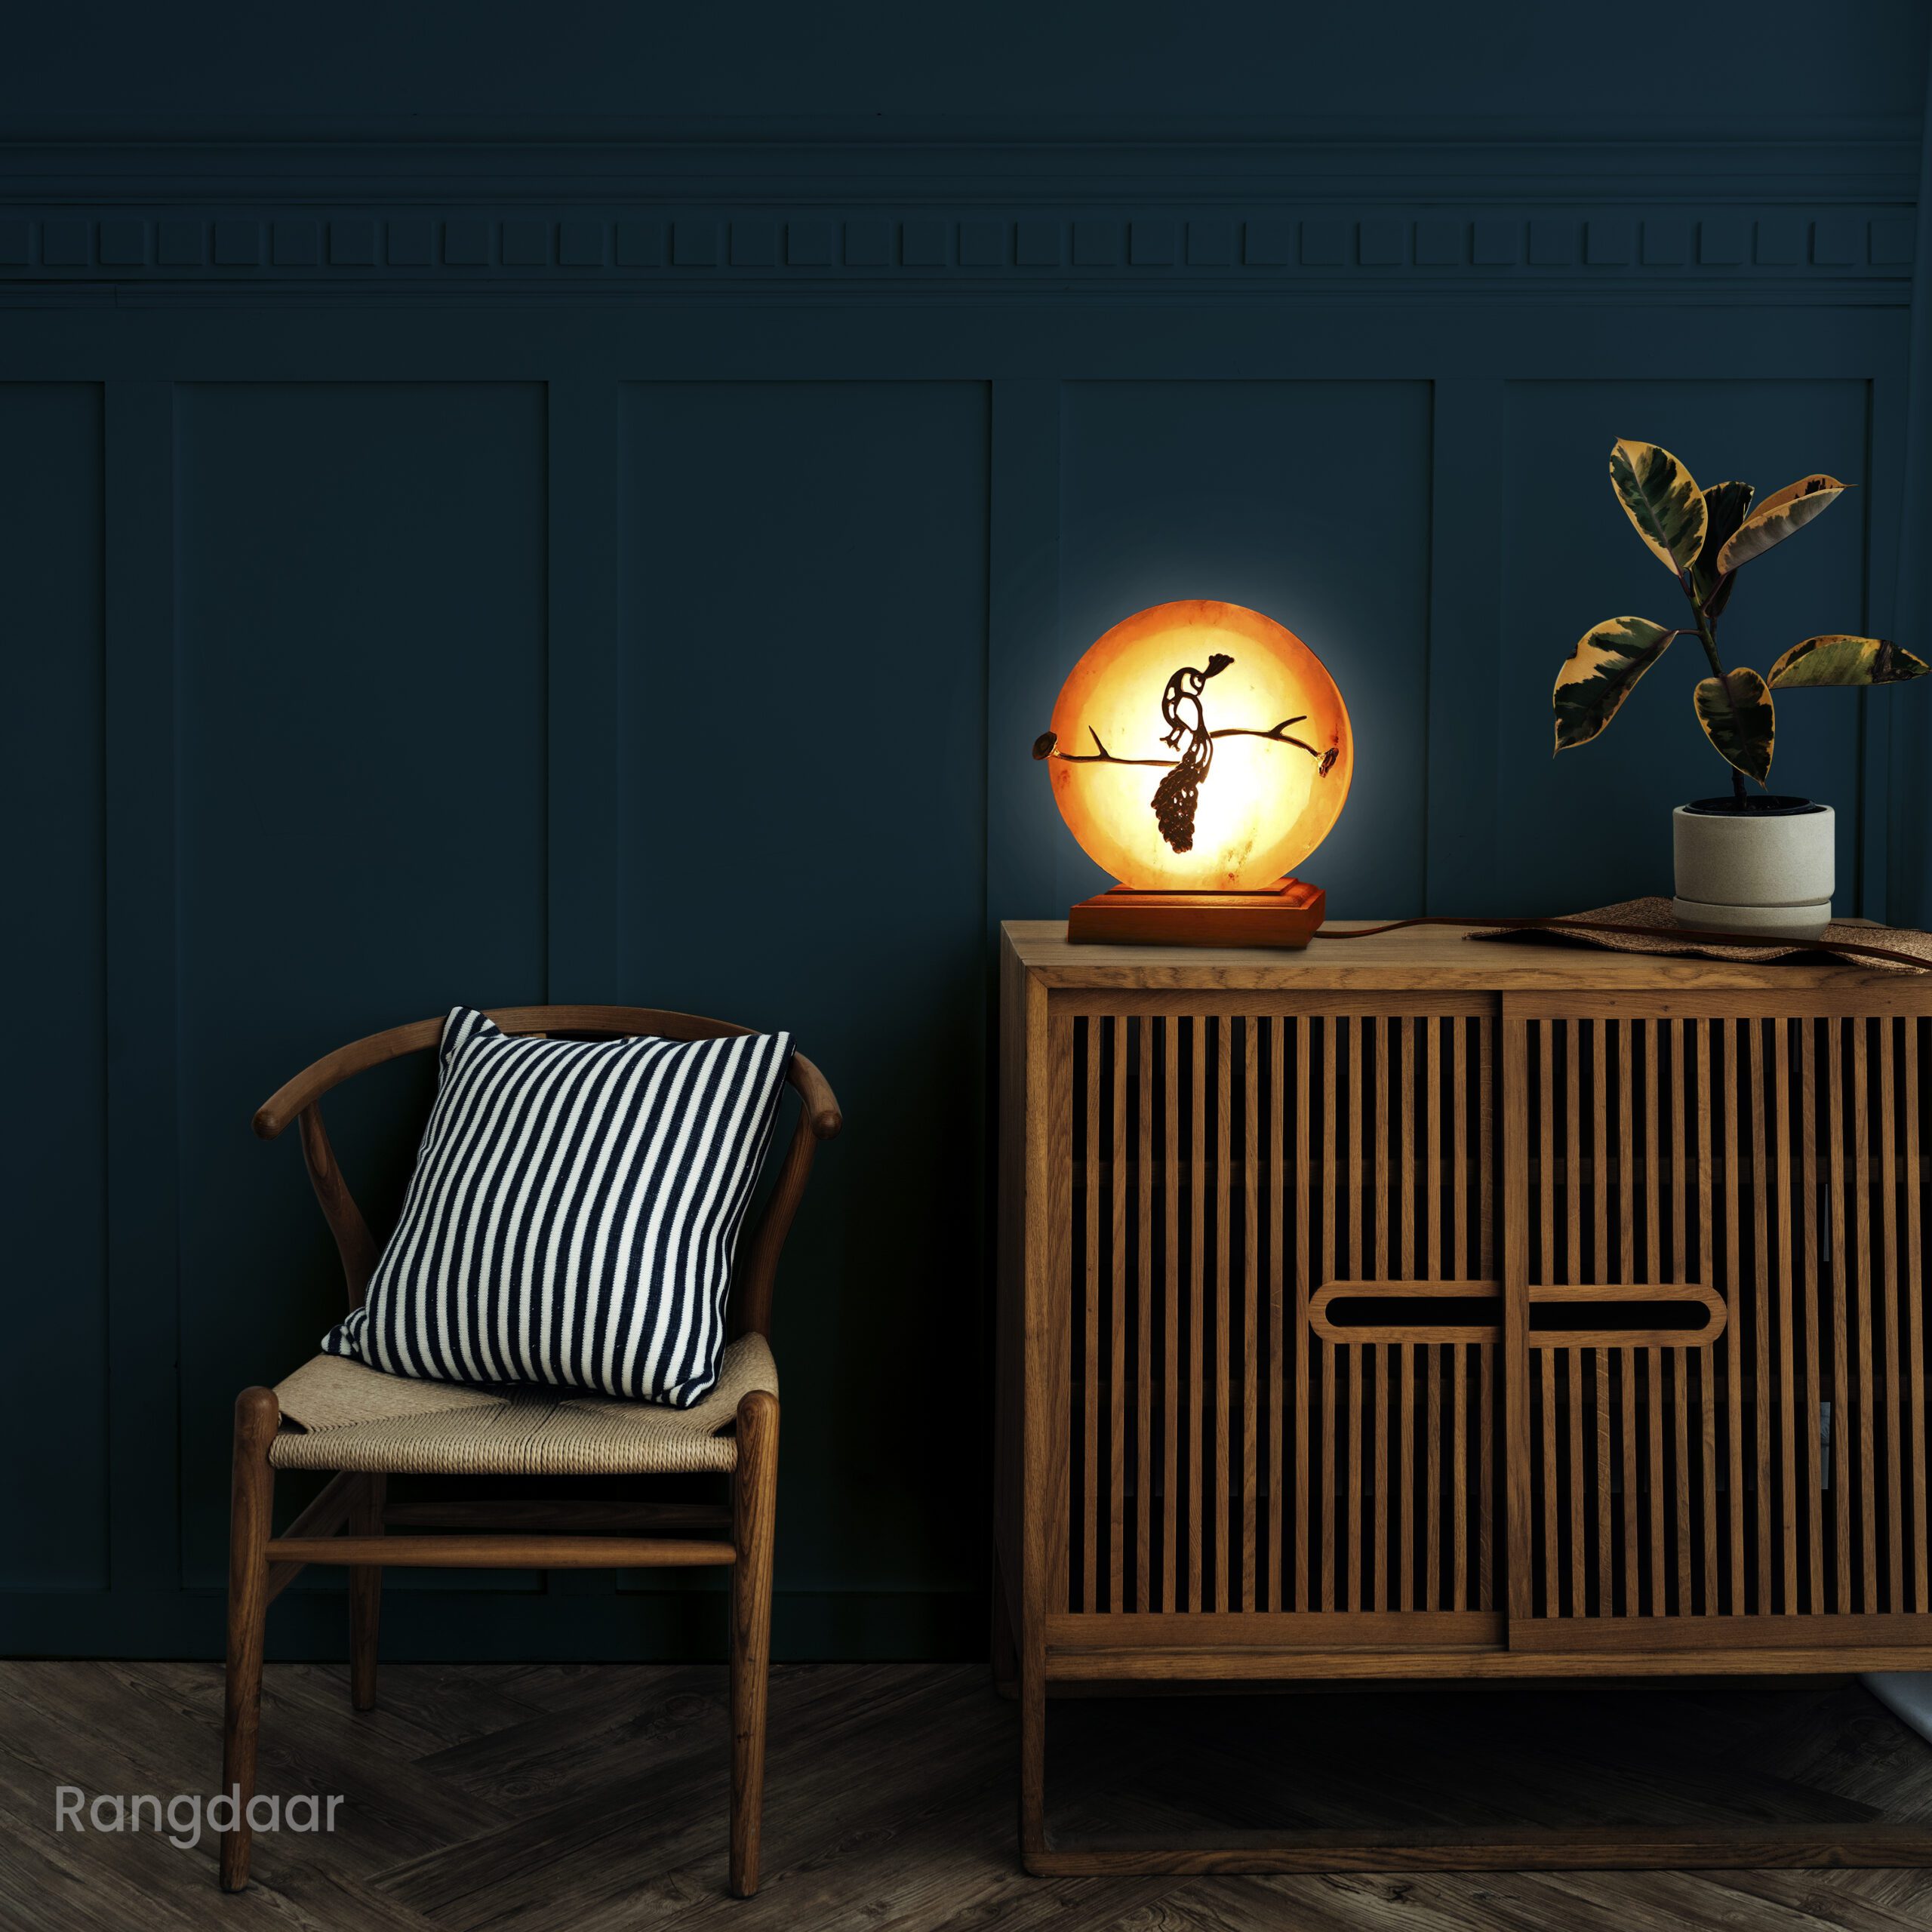 Scandinavian vintage wood cabinet with chair by a dark blue wall